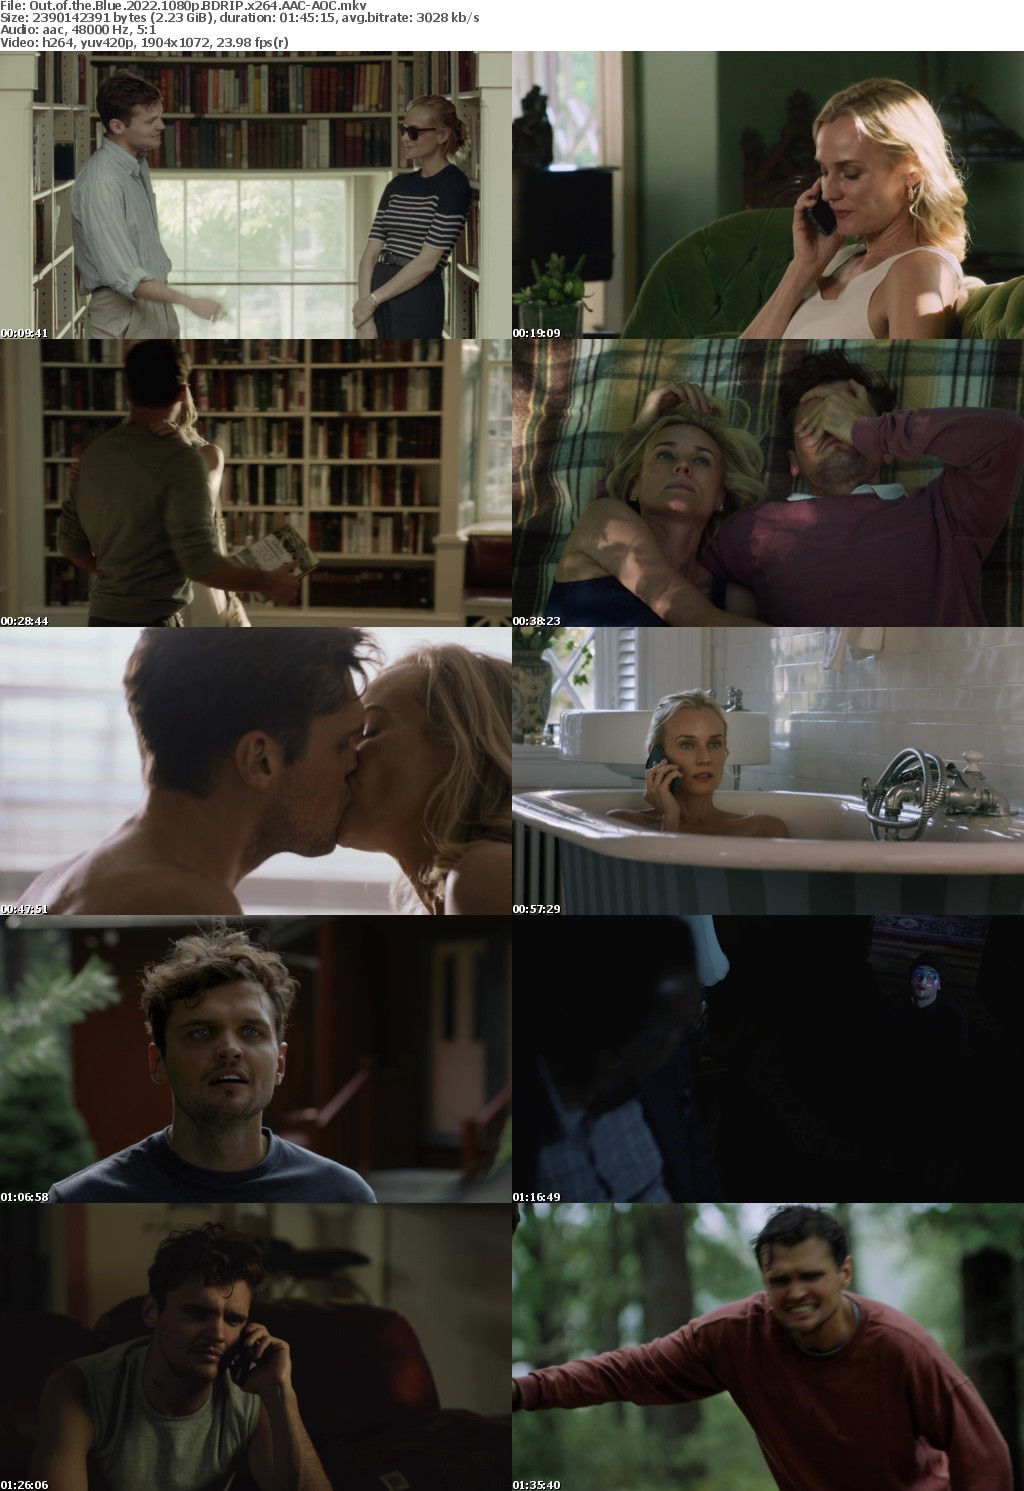 Out of the Blue 2022 1080p BDRIP x264 AAC-AOC